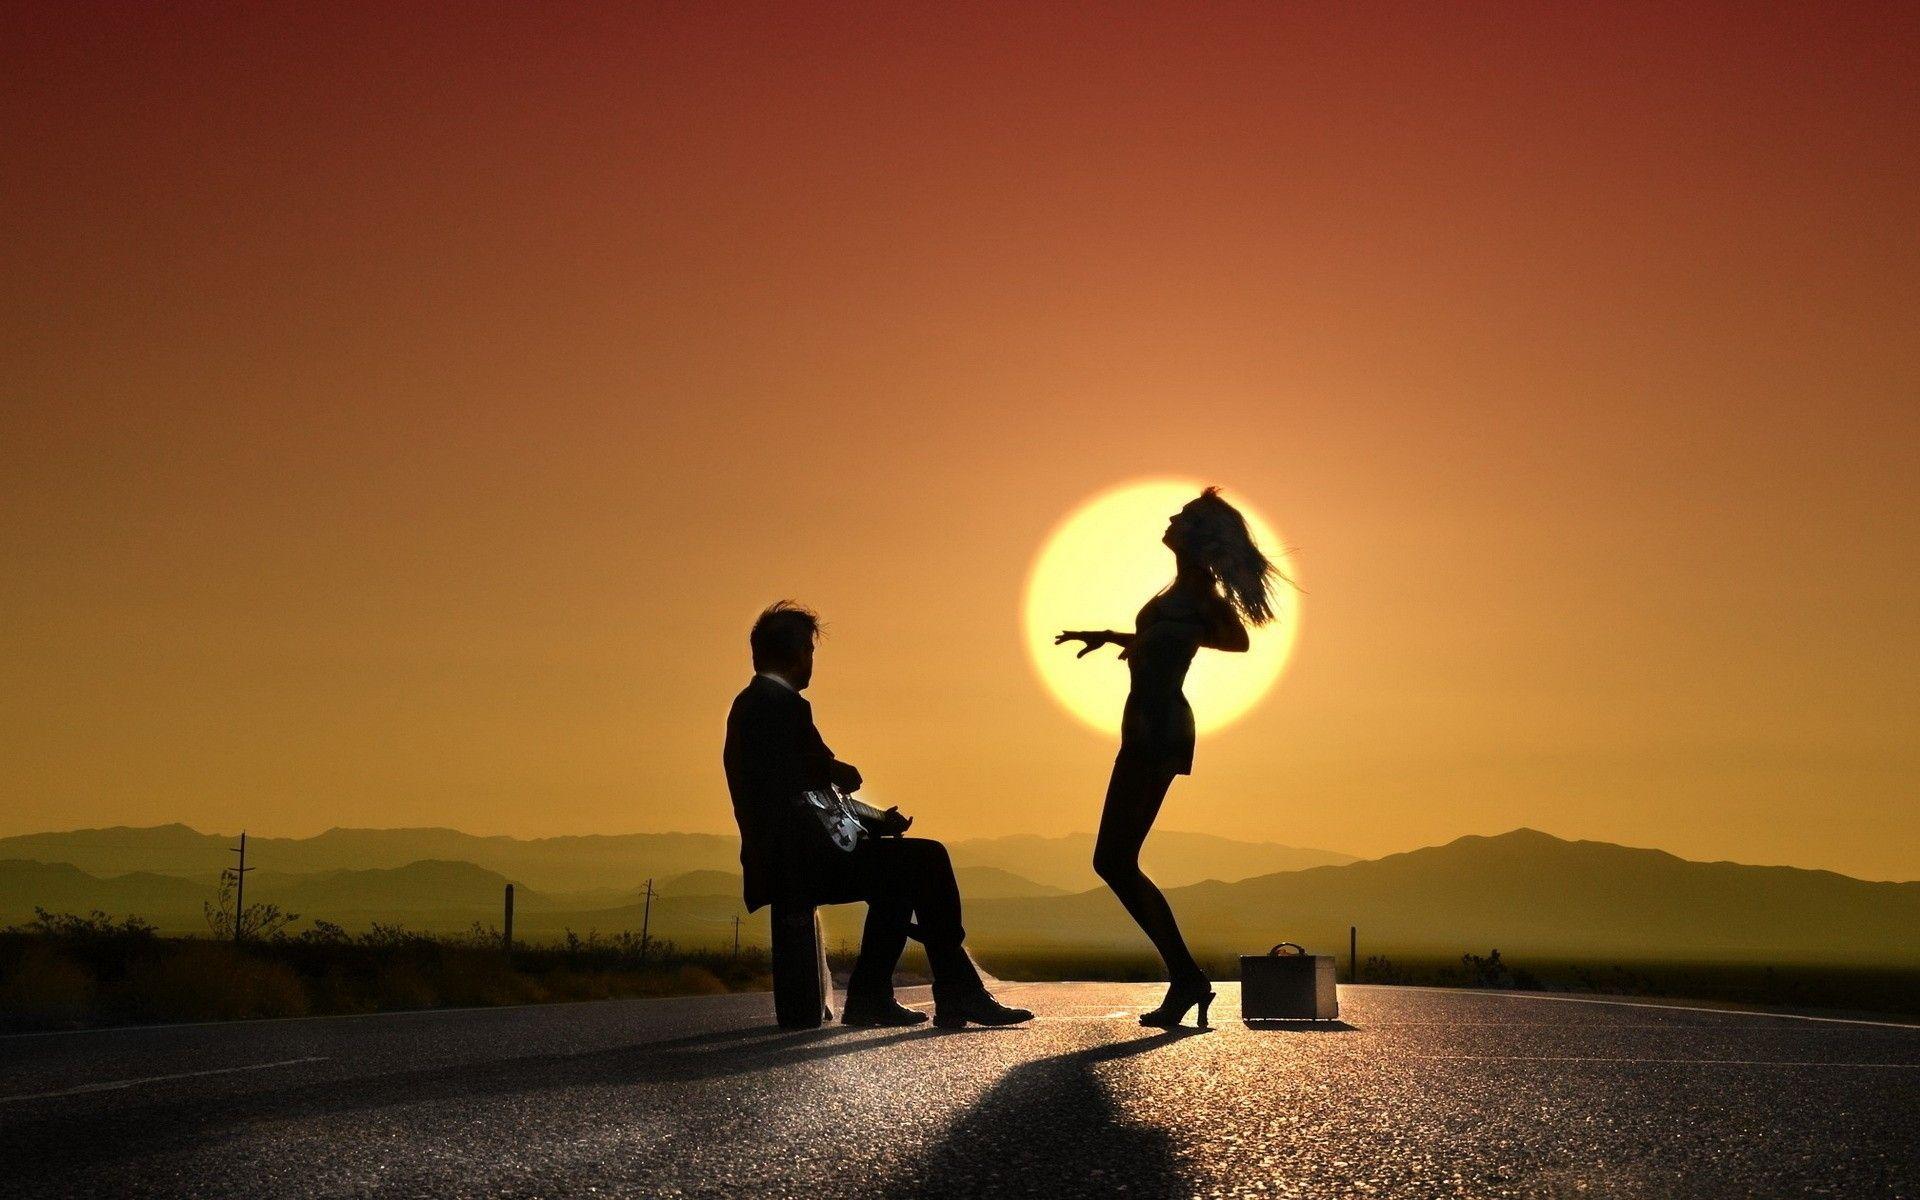 Download Wallpaper 1920x1200 Couple, Sunset, Road, Bags, Dance